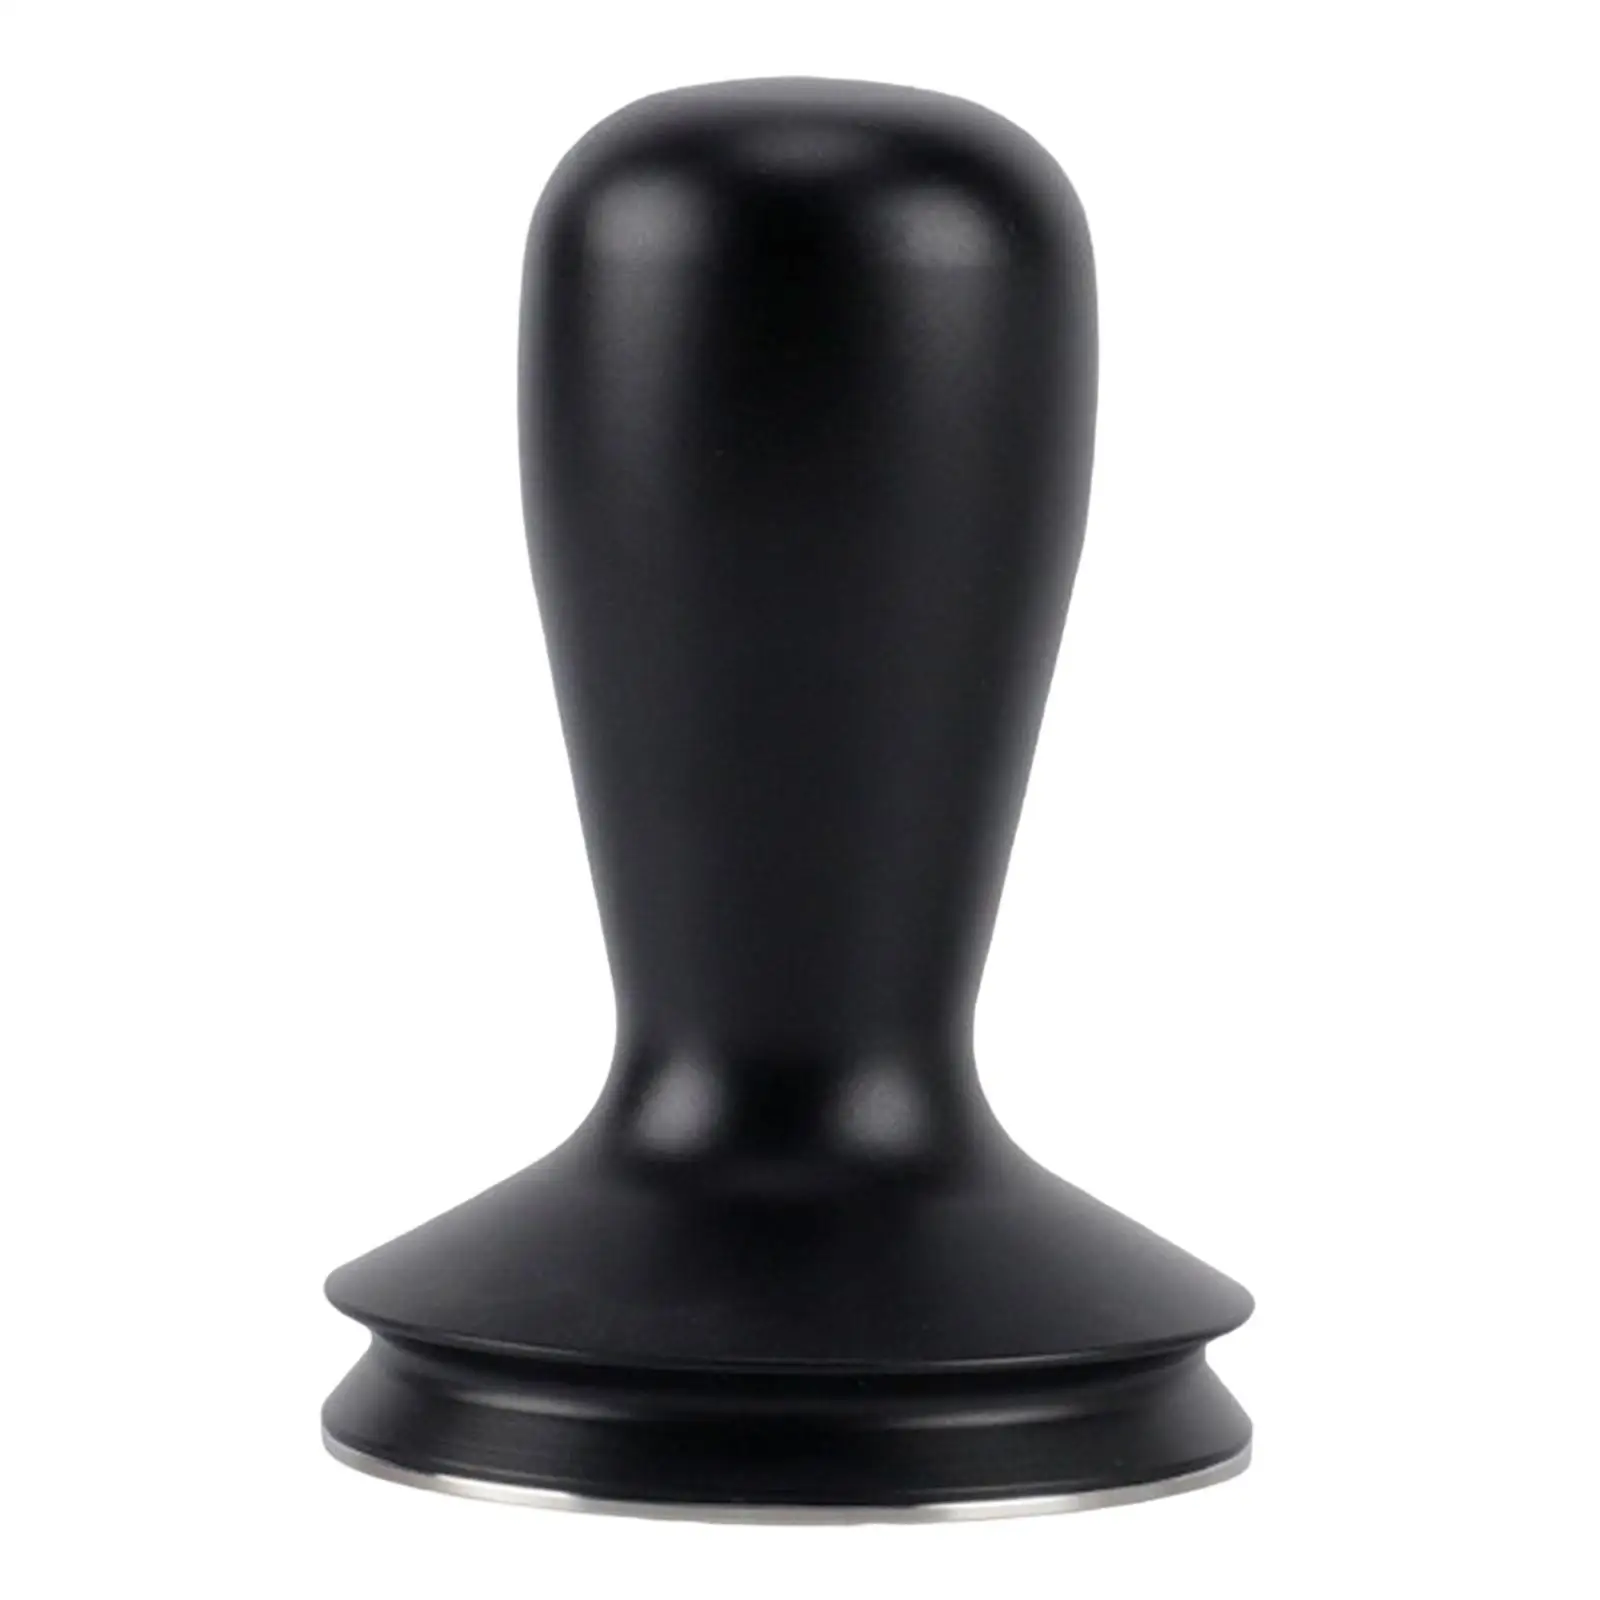 58mm Espresso Tamper Hand Tamper Coffee Bean Pressing Tool Barista Tool Professional Coffee Tamper for Shop Coffee Accessories